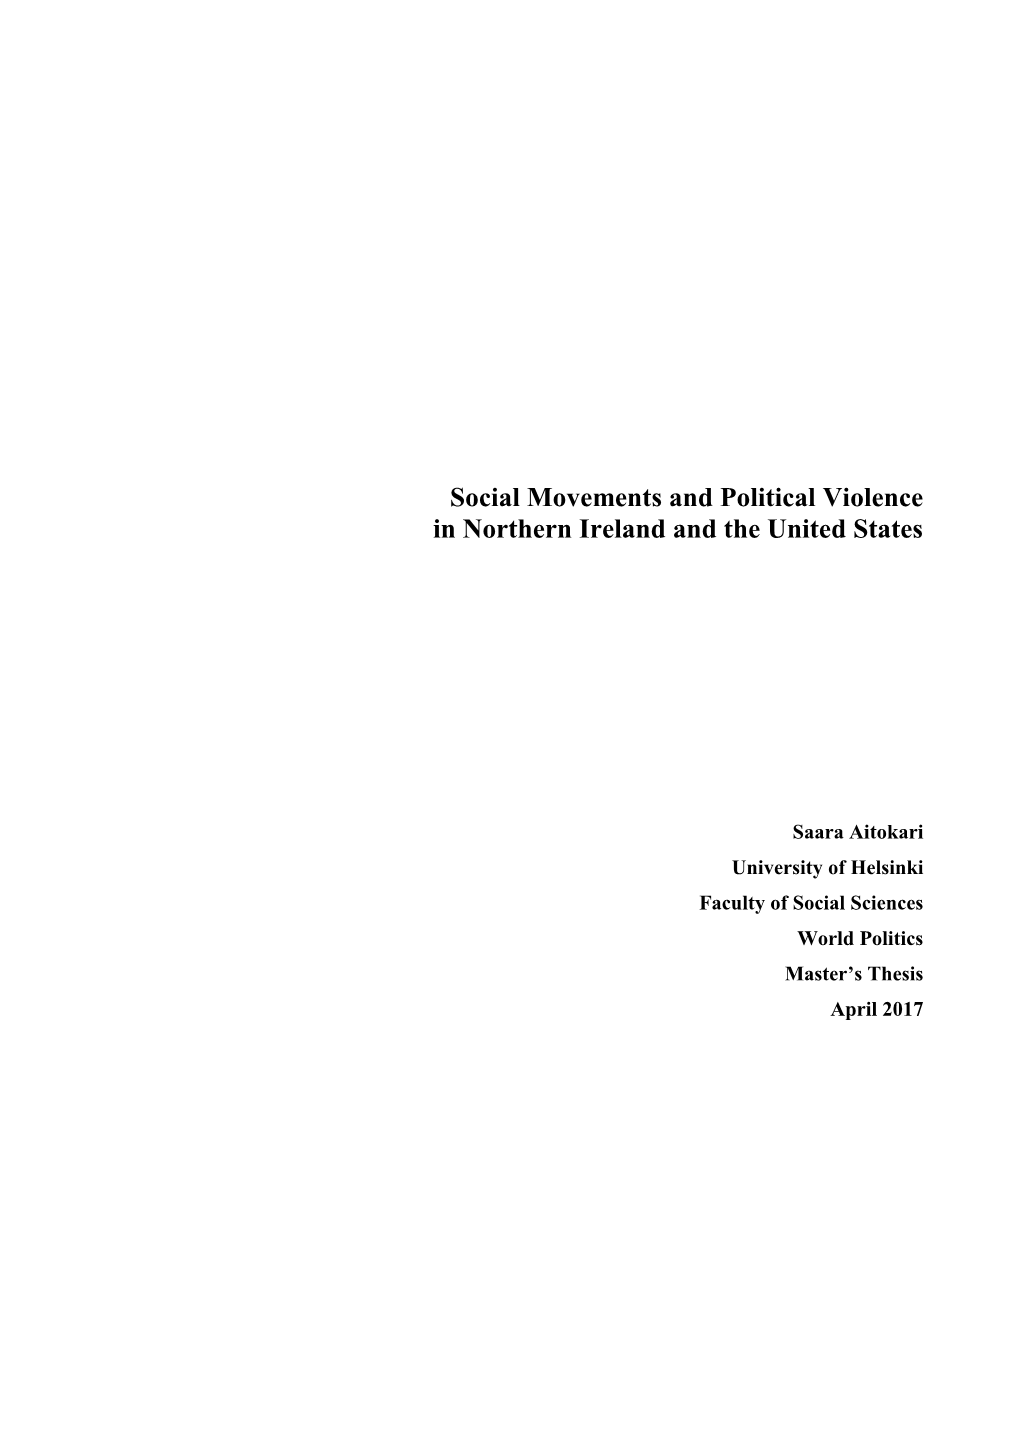 Social Movements and Political Violence in Northern Ireland and the United States